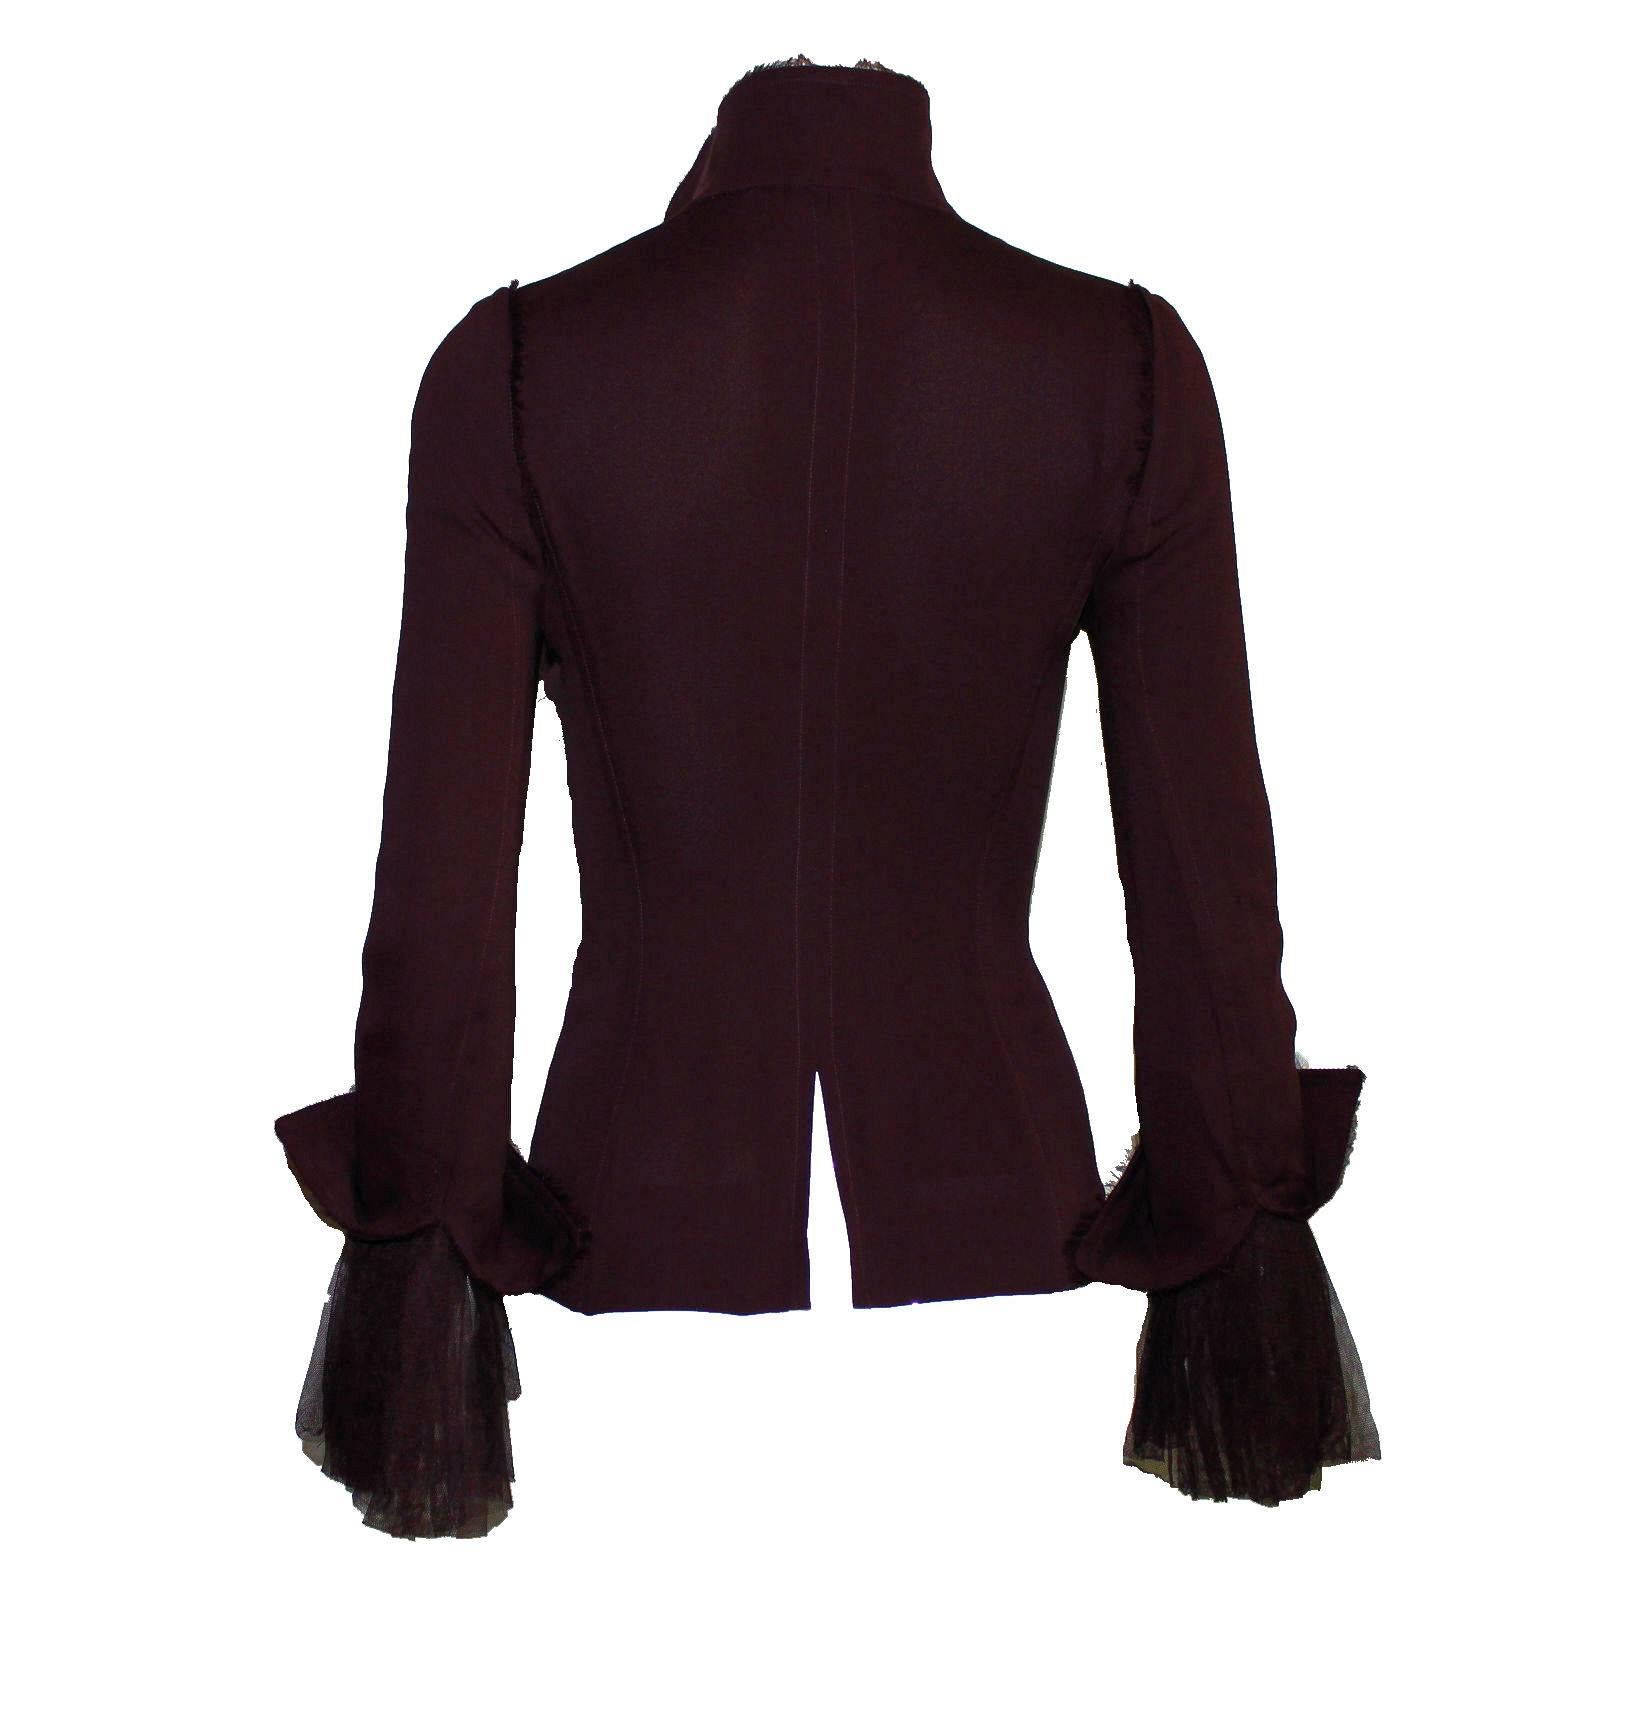 Stunning piece designed by Tom Ford for his FW collection for Yves Saint Laurent in 2002
Finest aubergine silk and tulle silk
Frayed details
Collection Autumn/Winter 2002
Two way front zippers engraved with YSL
Slit in back for a perfect fit
Made in